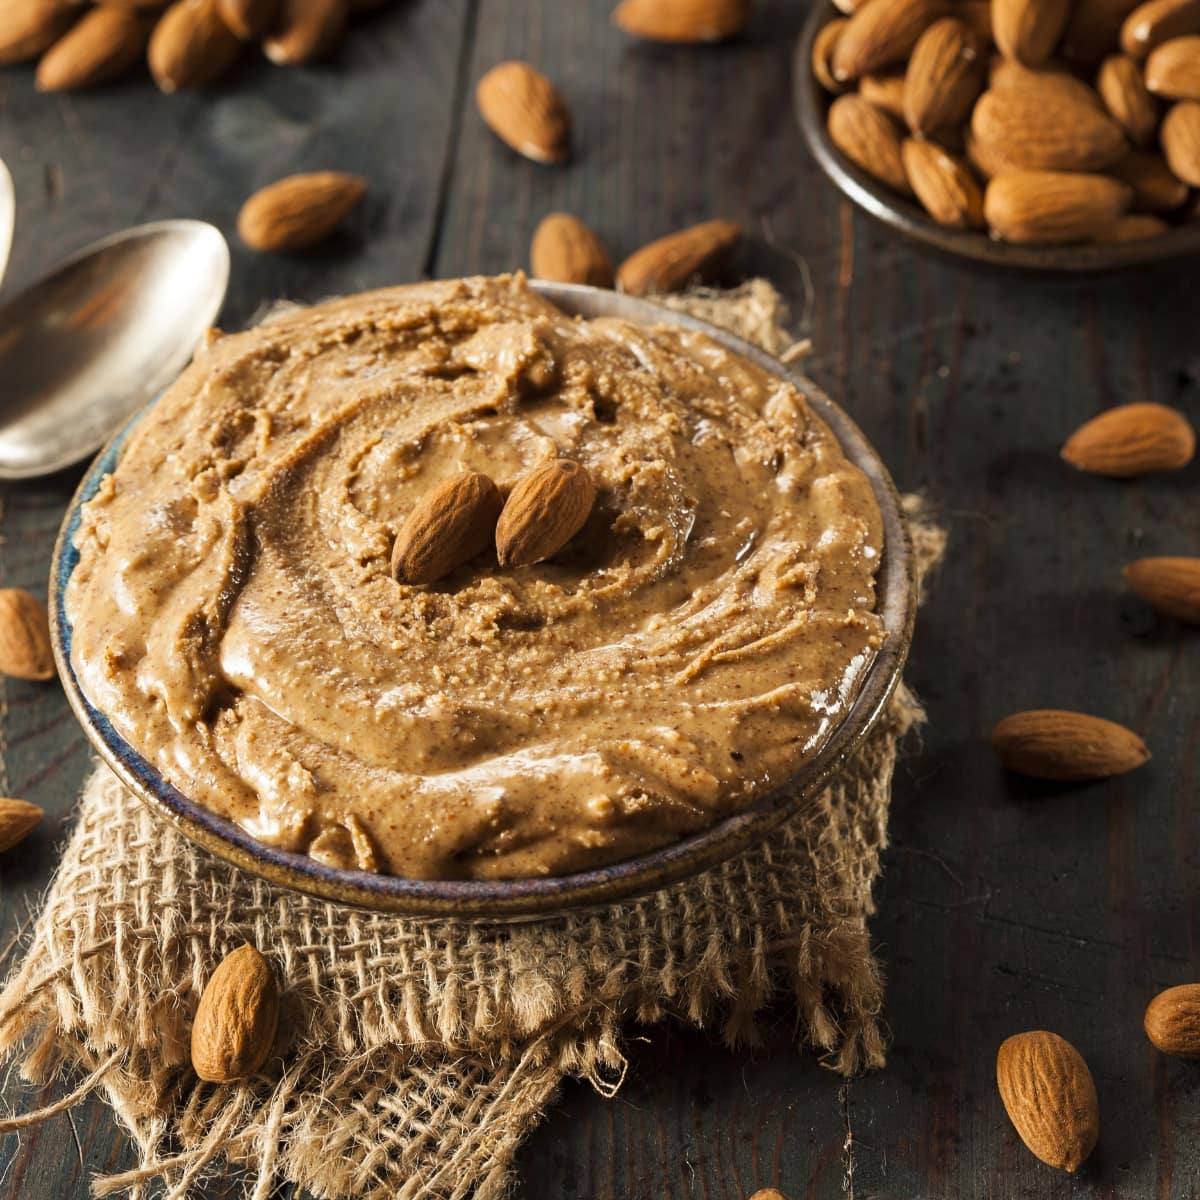 Almond Nuts and Creamy Almond Butter in a Glass Dish